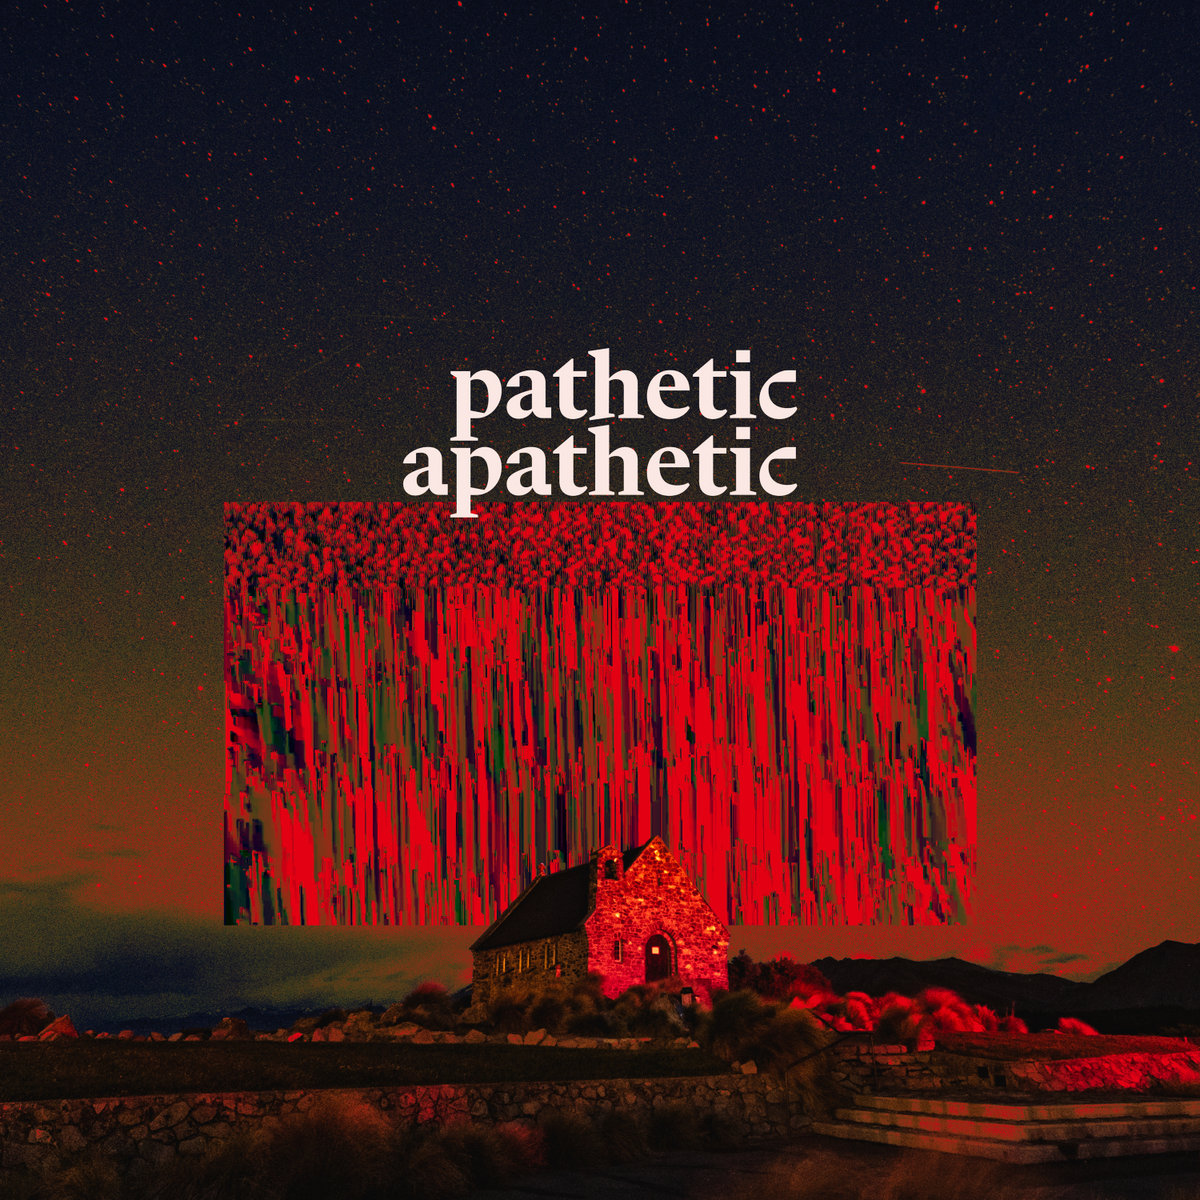 ALBUM REVIEW: Pathetic Apathetic by Indoor Pets